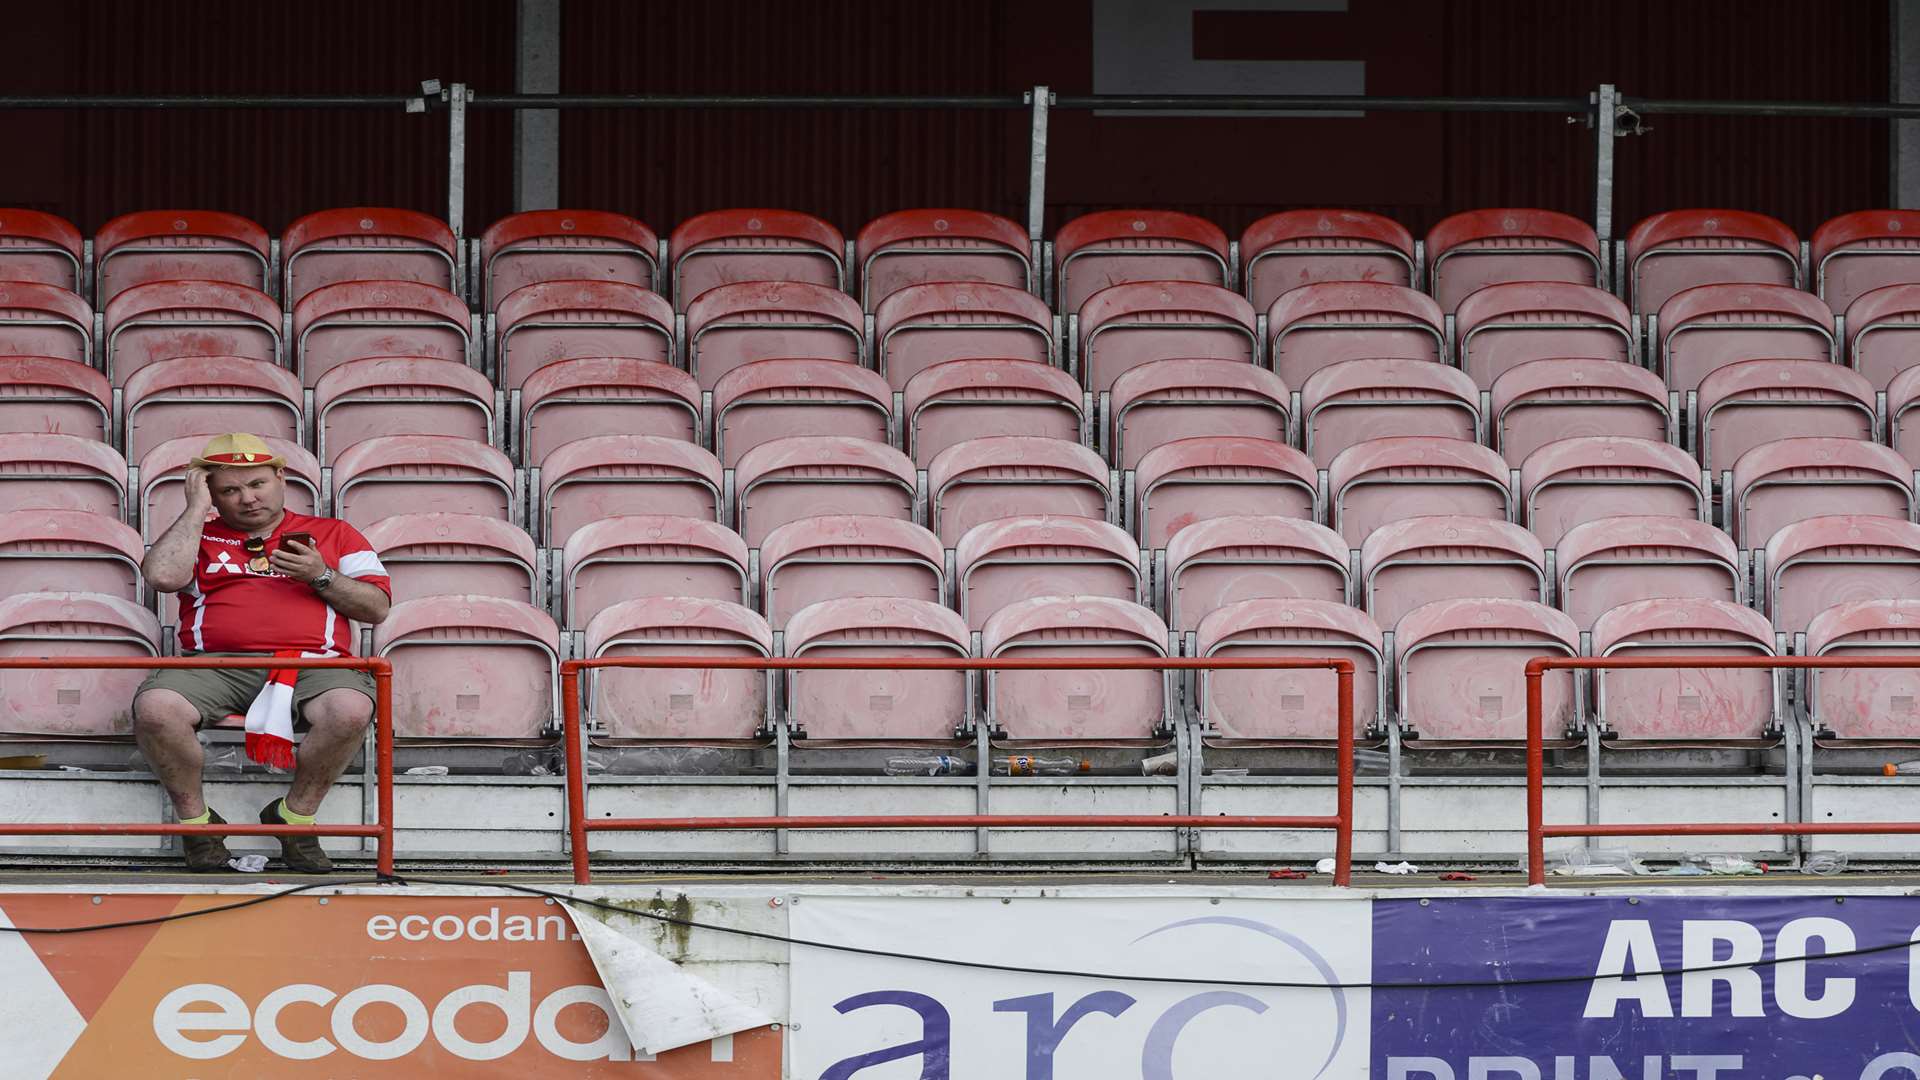 A sole Ebbsfleet fan sits in the stands, pondering what might have been. Picture: Andy Payton